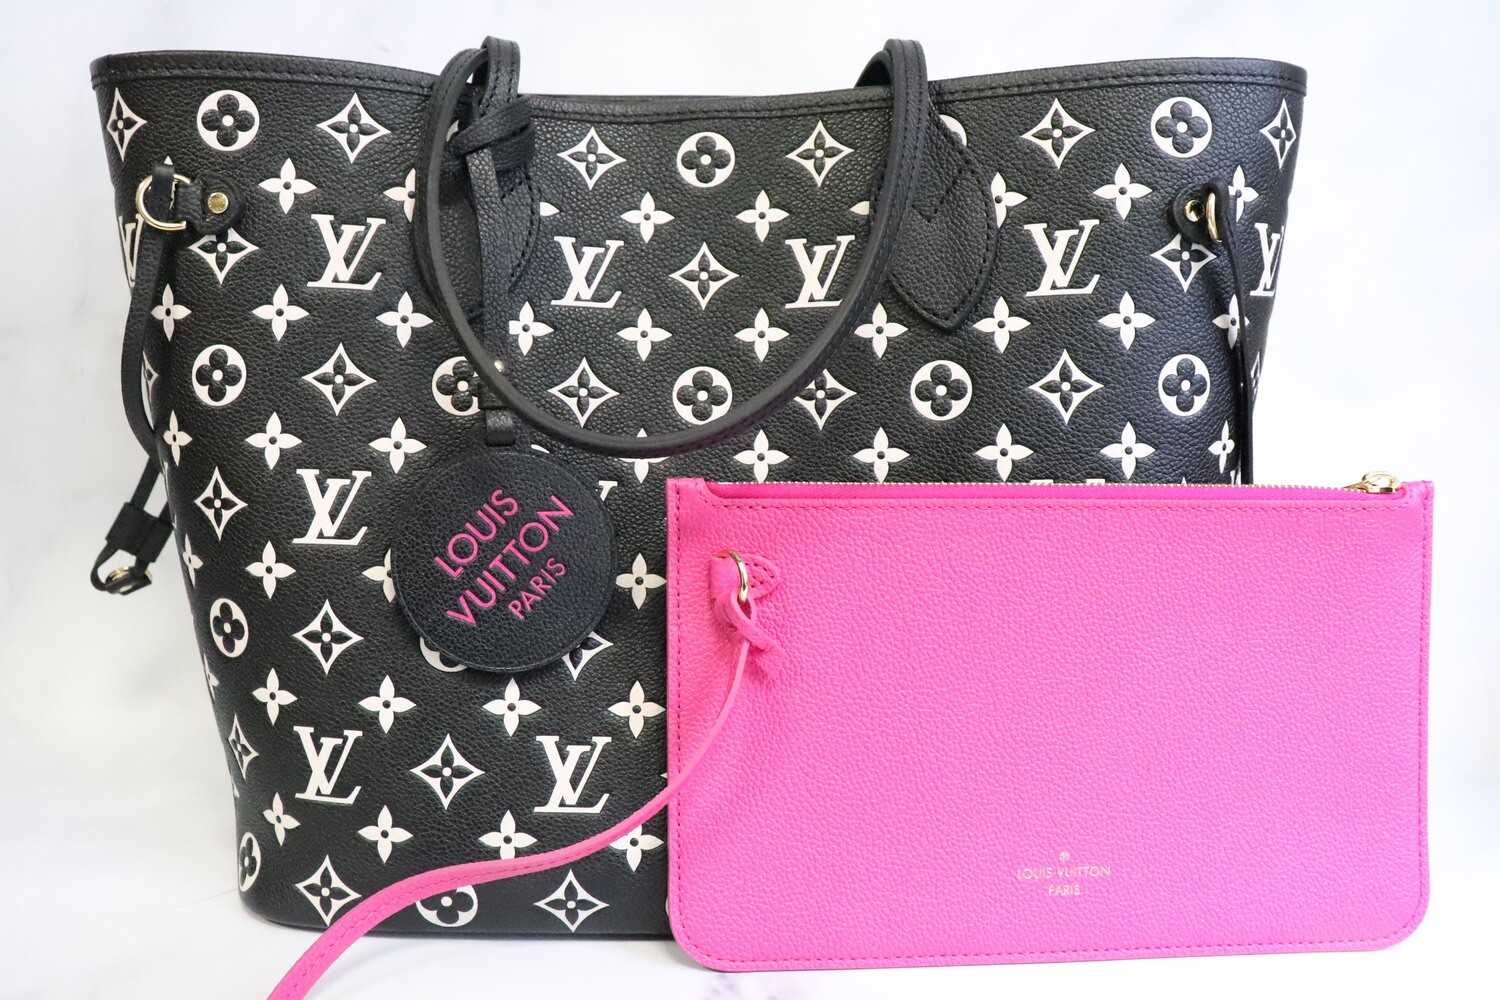 Louis Vuitton Neverfull MM with Pouch, Empreinte Leather Black and Hot Pink,  New in Dustbag